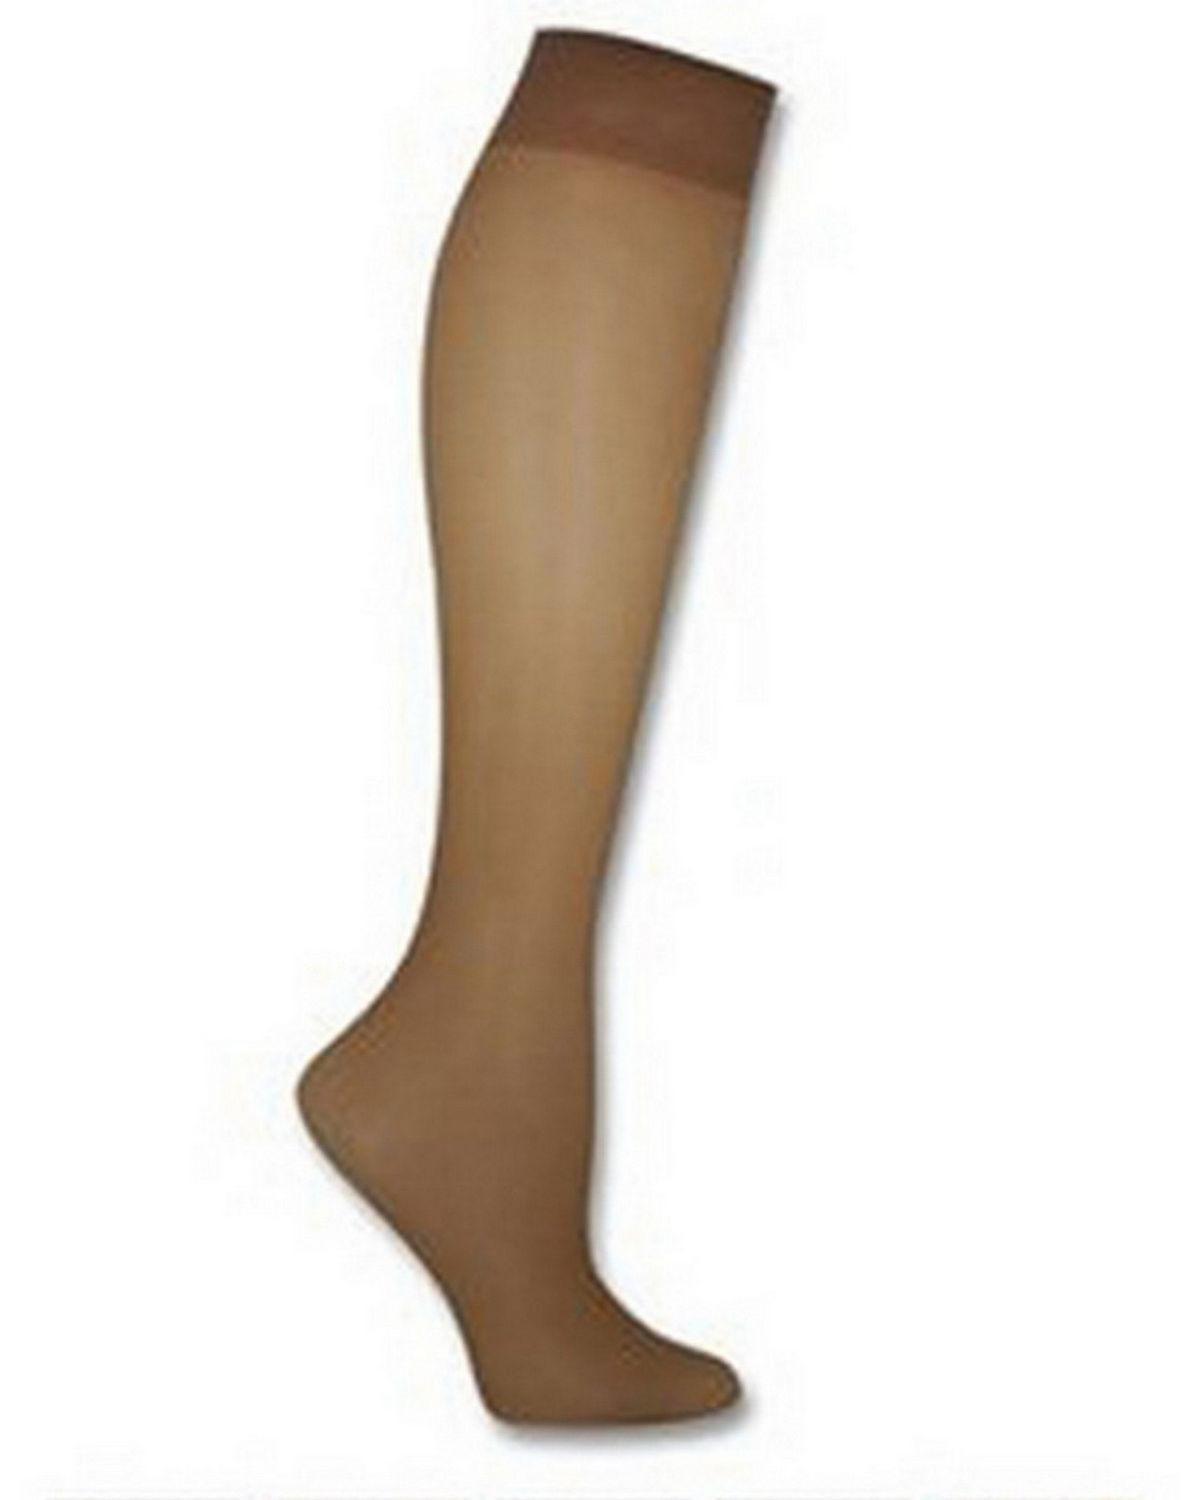 Hanes 00P19 Women's Silk Reflections Plus Silky Sheer Knee High ET - Pearl - One Size #silk